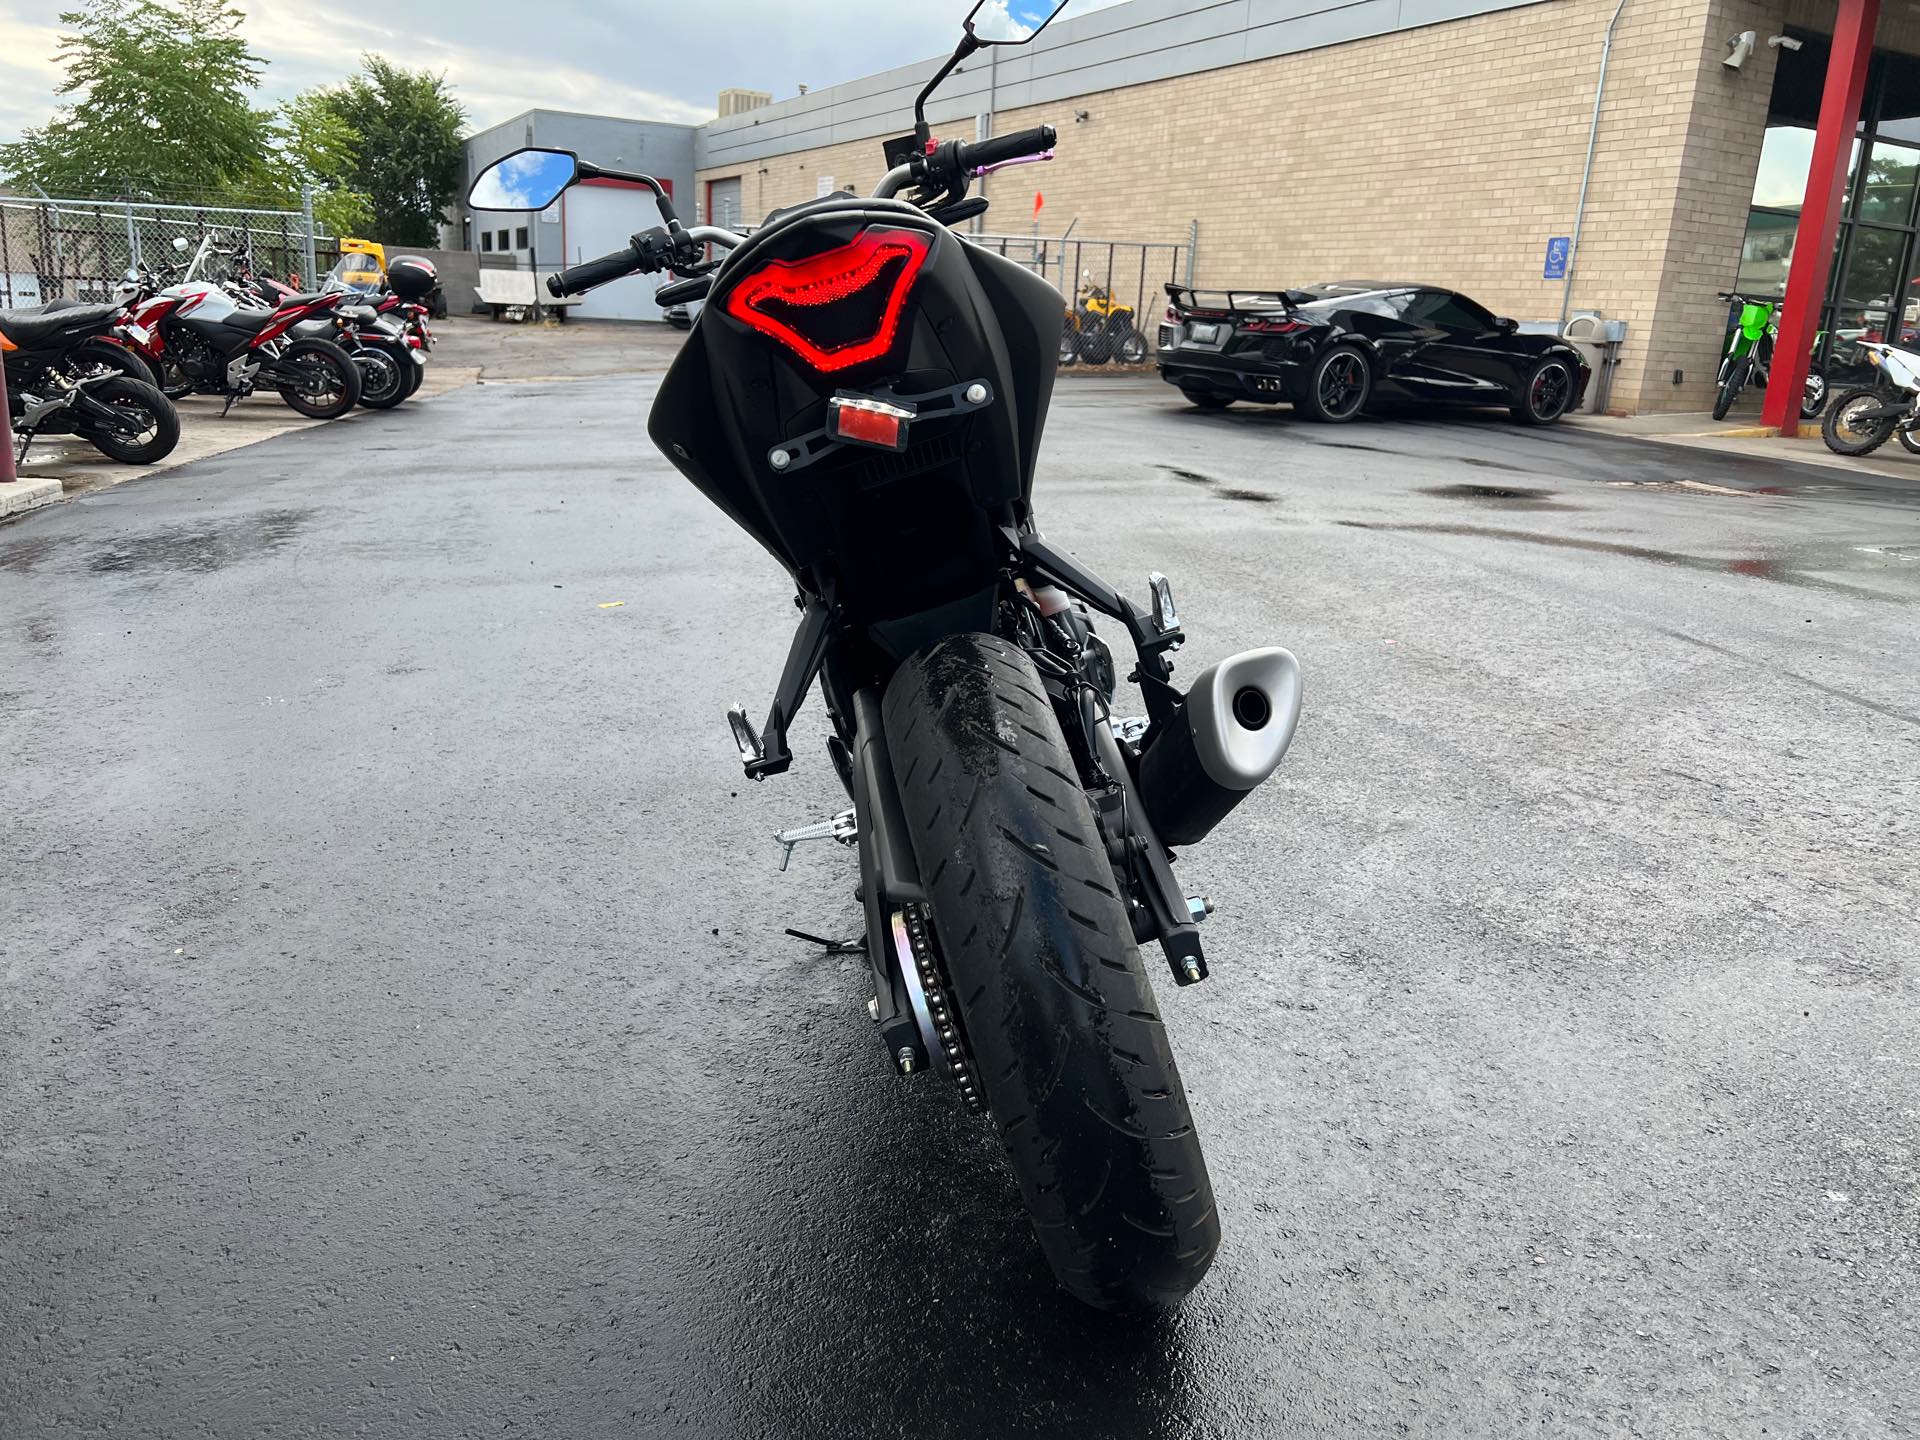 2020 Yamaha MT 03 at Aces Motorcycles - Fort Collins